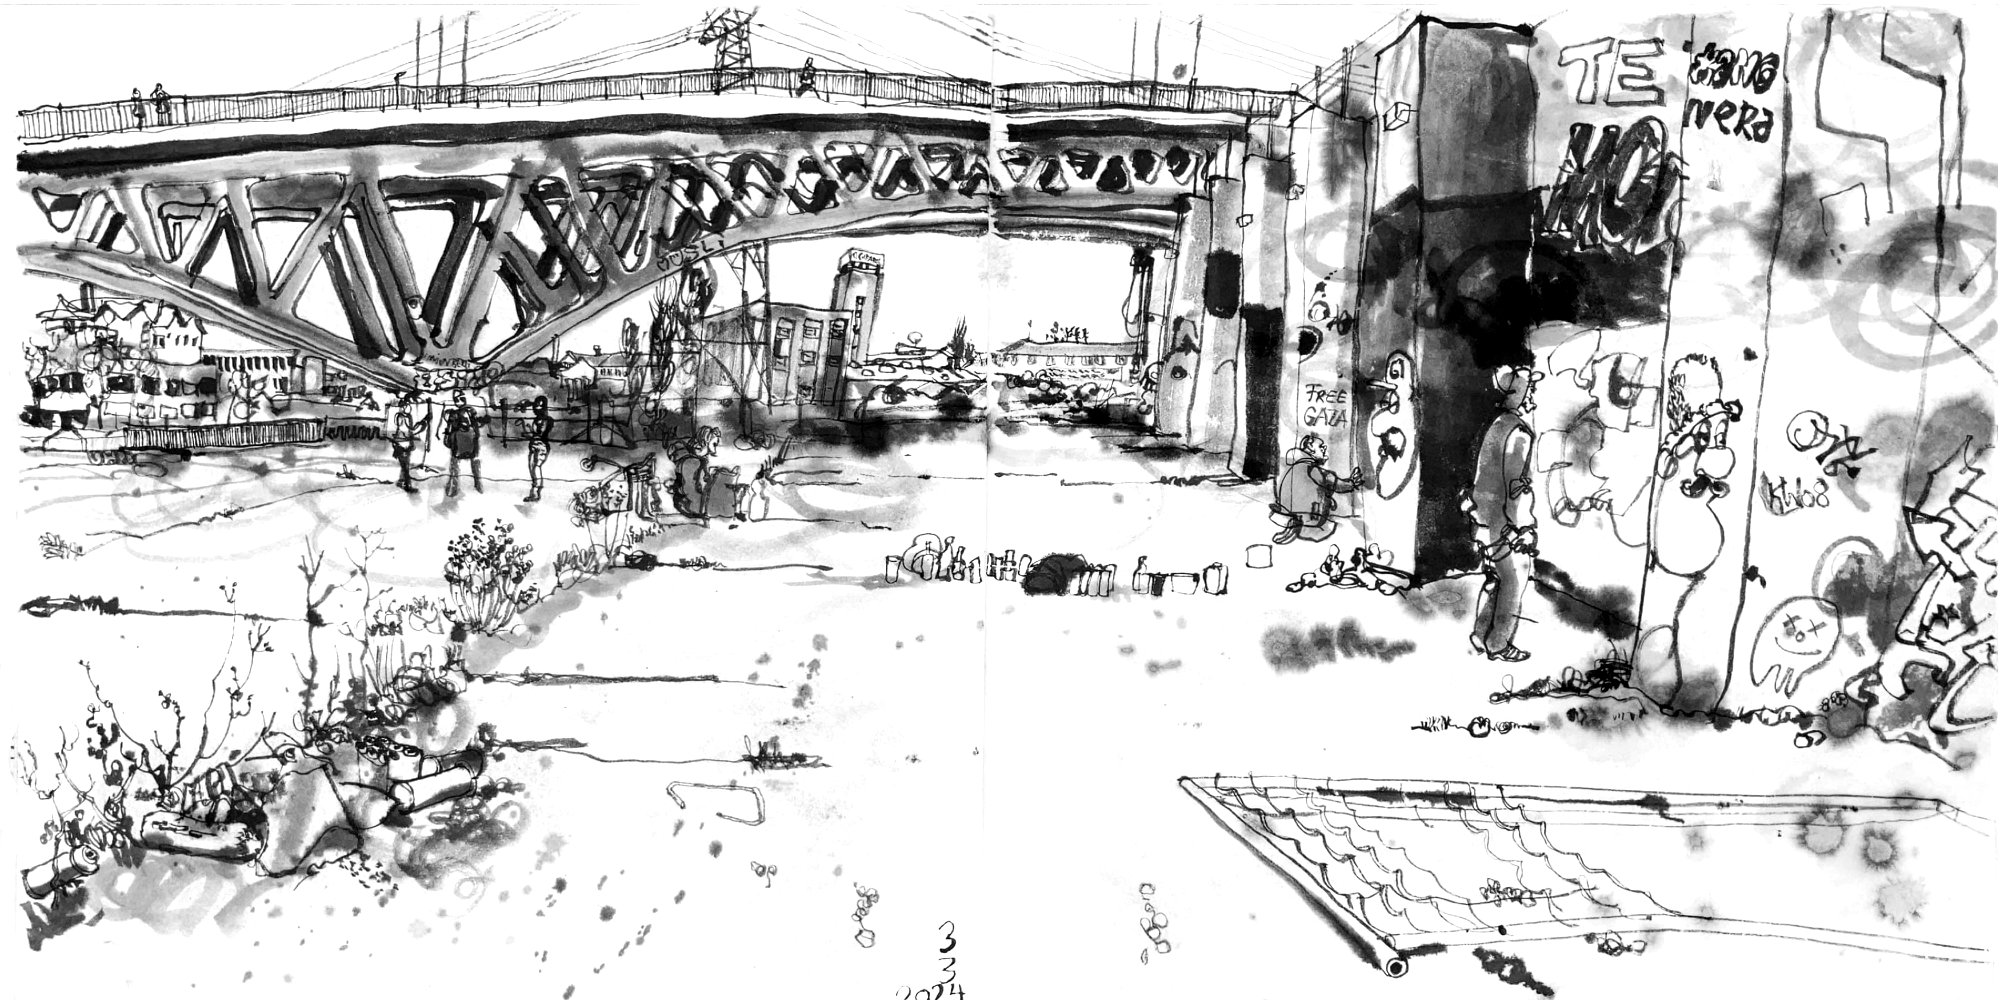 Ink drawing of a place by the river - in the backround is a bridge with bowed steel truss griders, on the right a wall, where sprayers do graffiti, the ground is industrial concrete pavemant, with plants in the joints. A woman sits on the ground, veiwing the sprayers. people in the back are taking photographs.